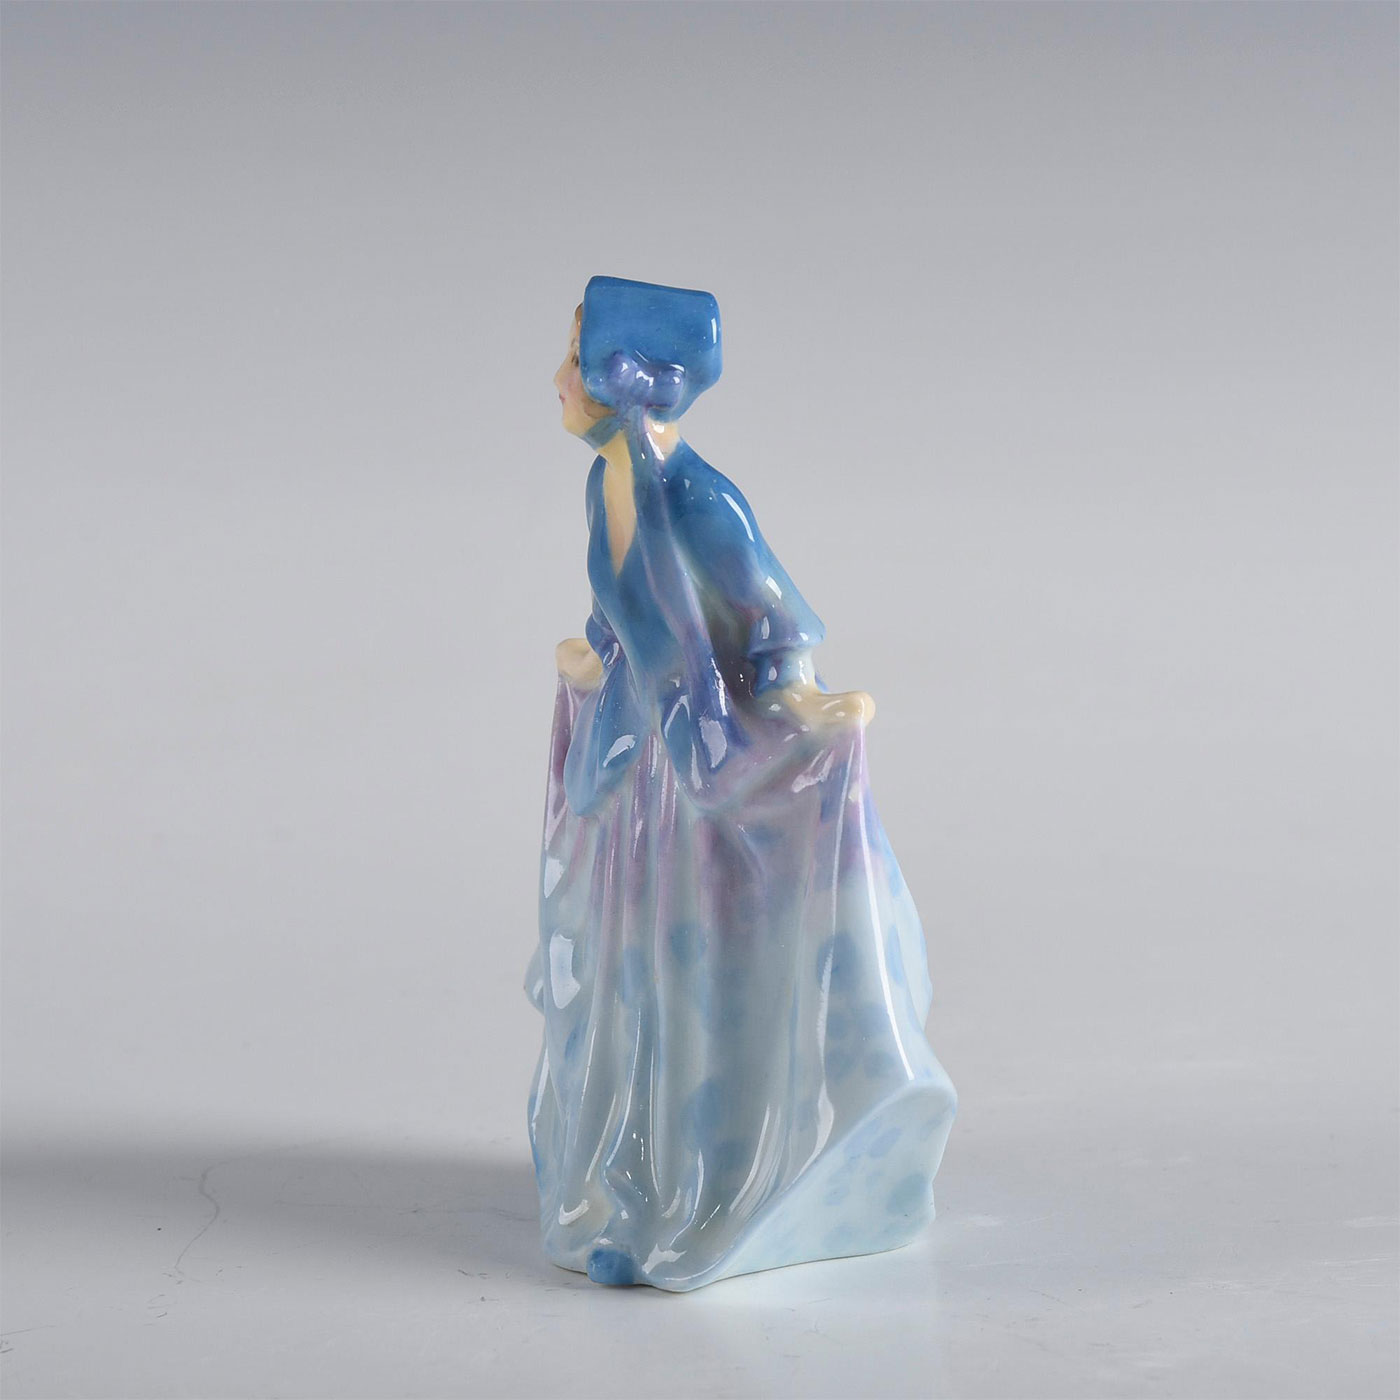 ROYAL DOULTON MINIATURE FIGURINE, SWEET ANNE - Image 2 of 5